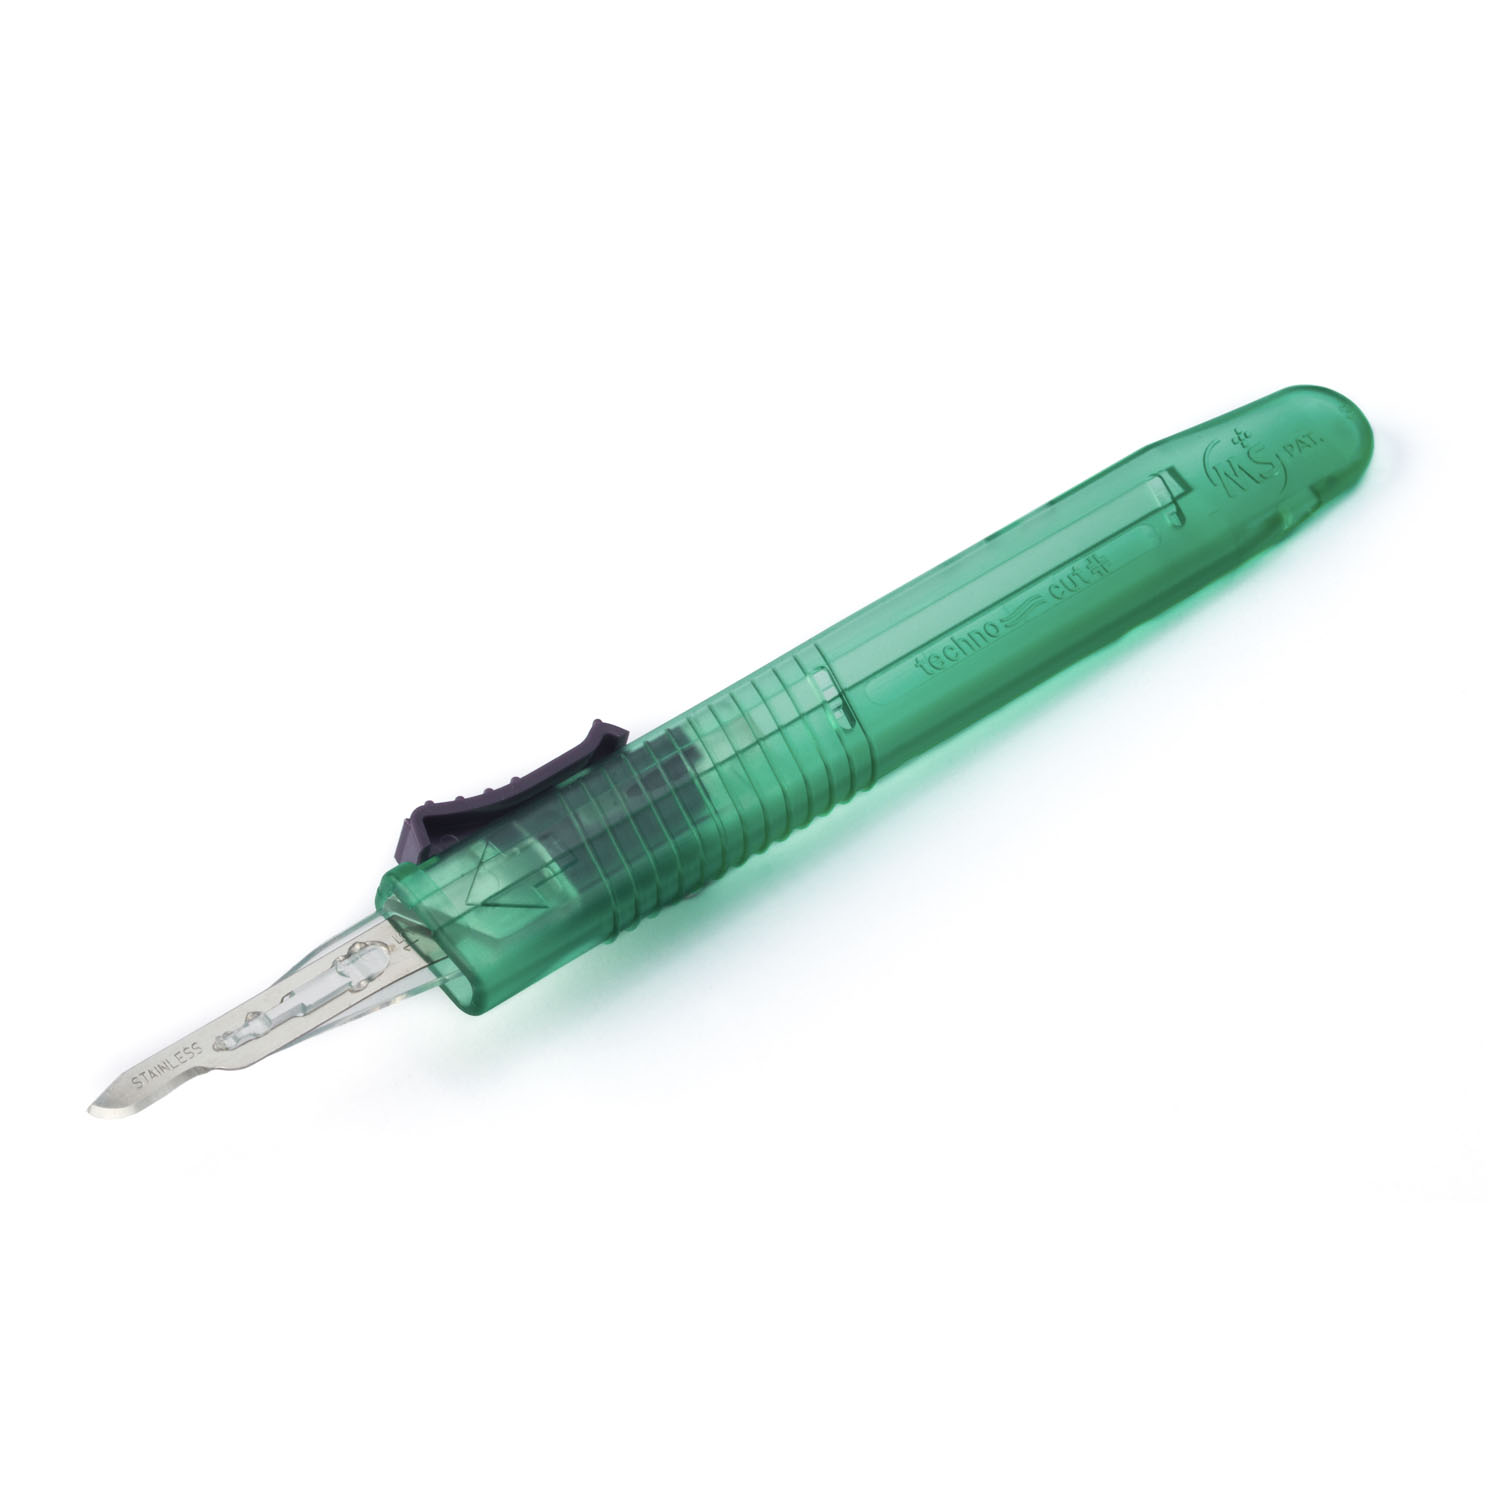 MYCO DISPOSABLE RELI-CUT SAFETY SCALPELS : 6008TR-15 BX             $12.35 Stocked